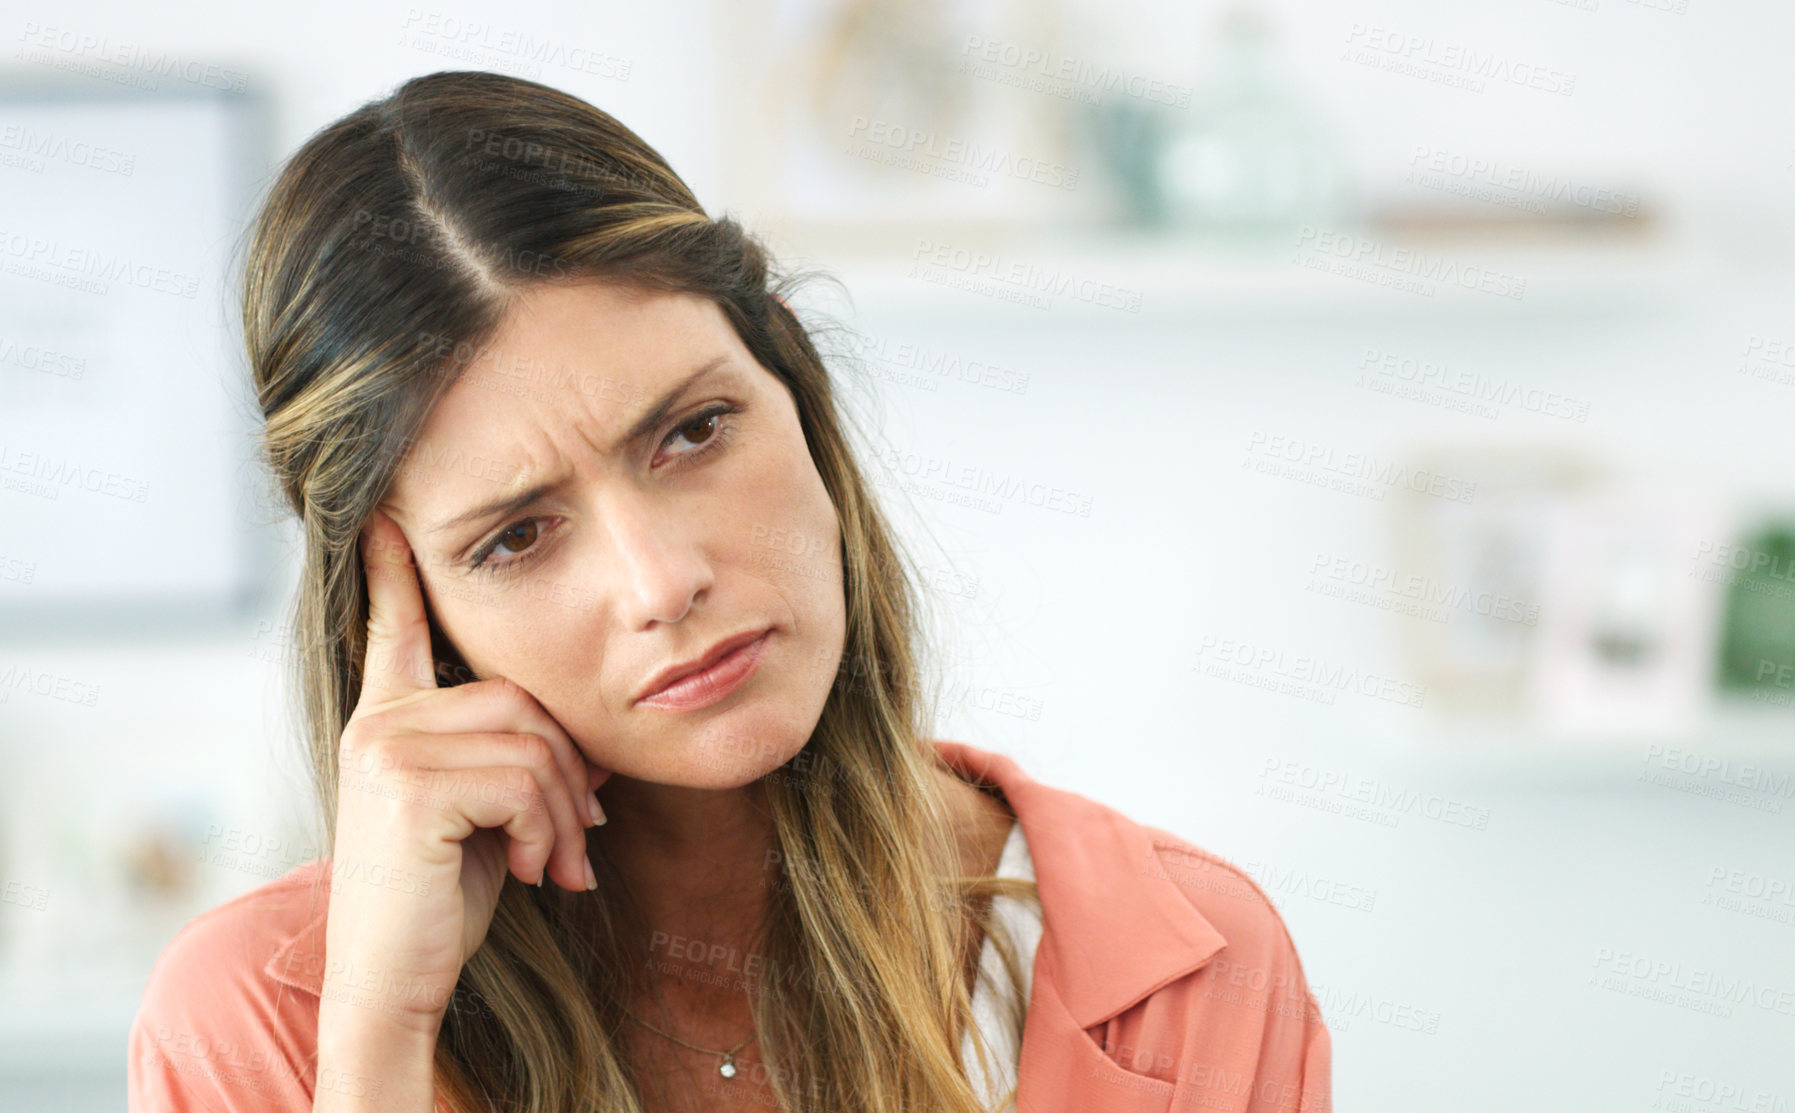 Buy stock photo Cropped shot of a young woman looking upset while sitting at home